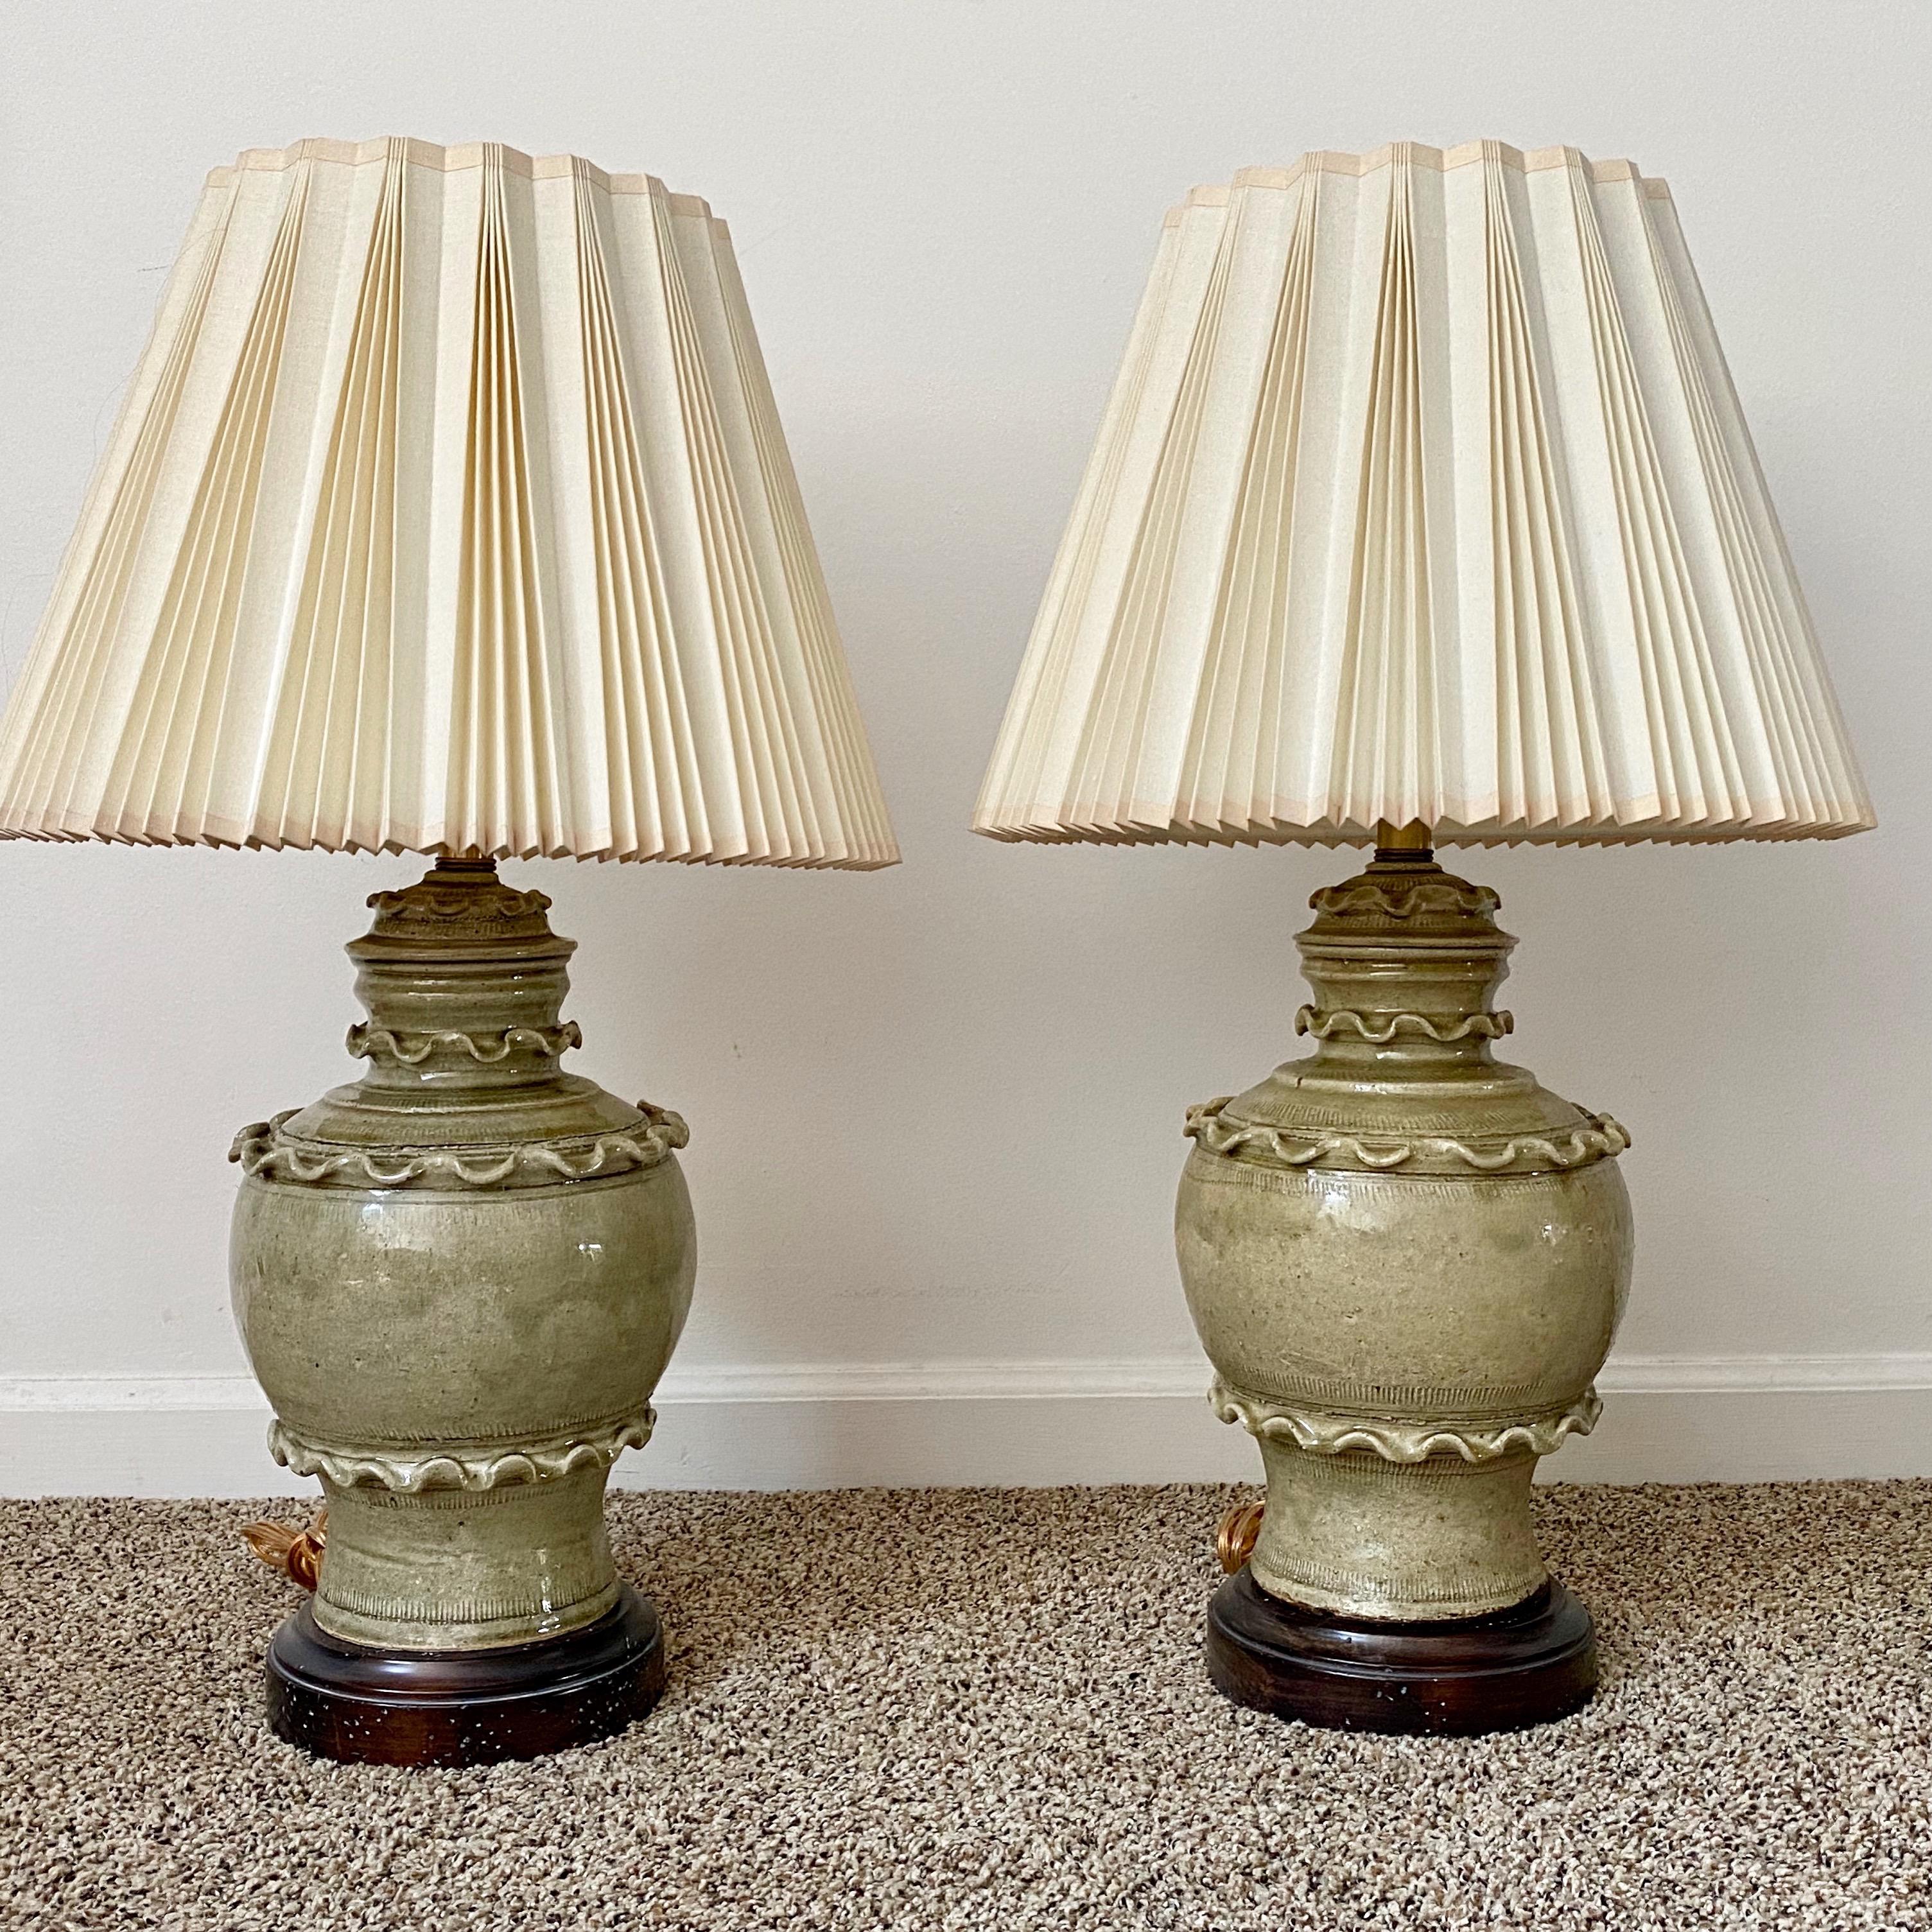 Ceramic Glazed Celadon Lamps by Frederick Cooper, Pair